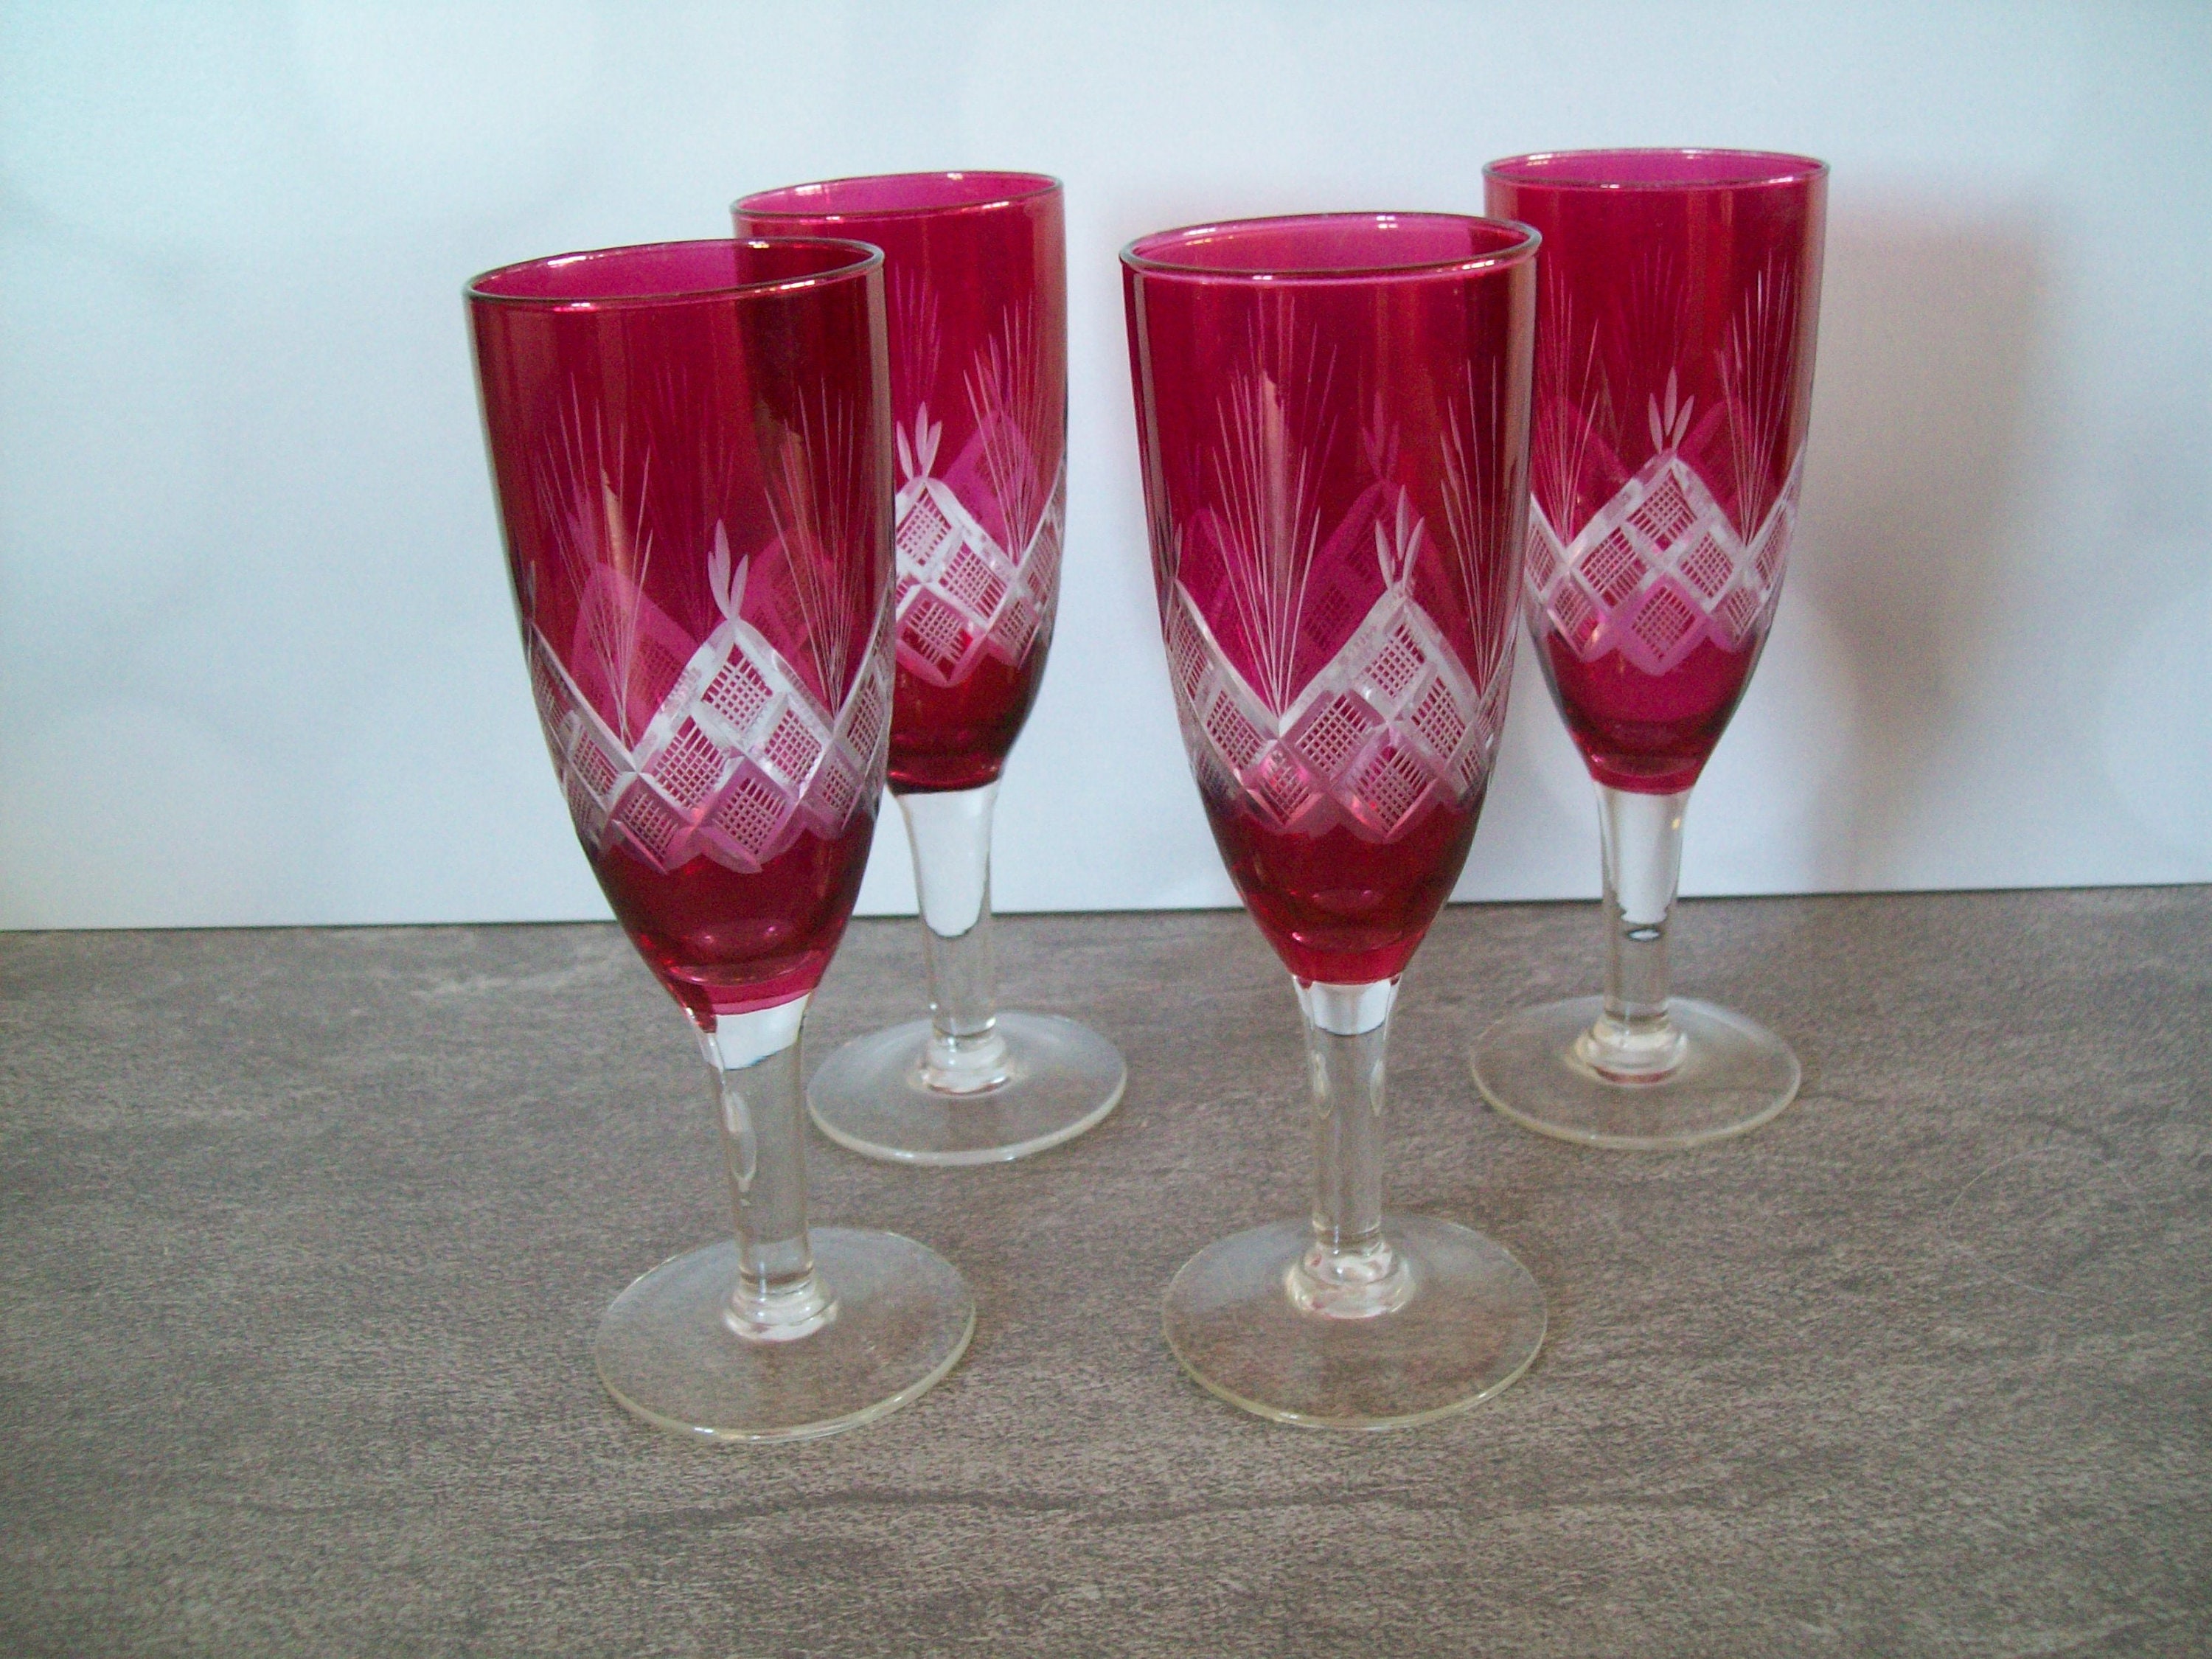 Lets Drink Pearls Pink Glass, Champagne Cocktail Glass, Aesthetic